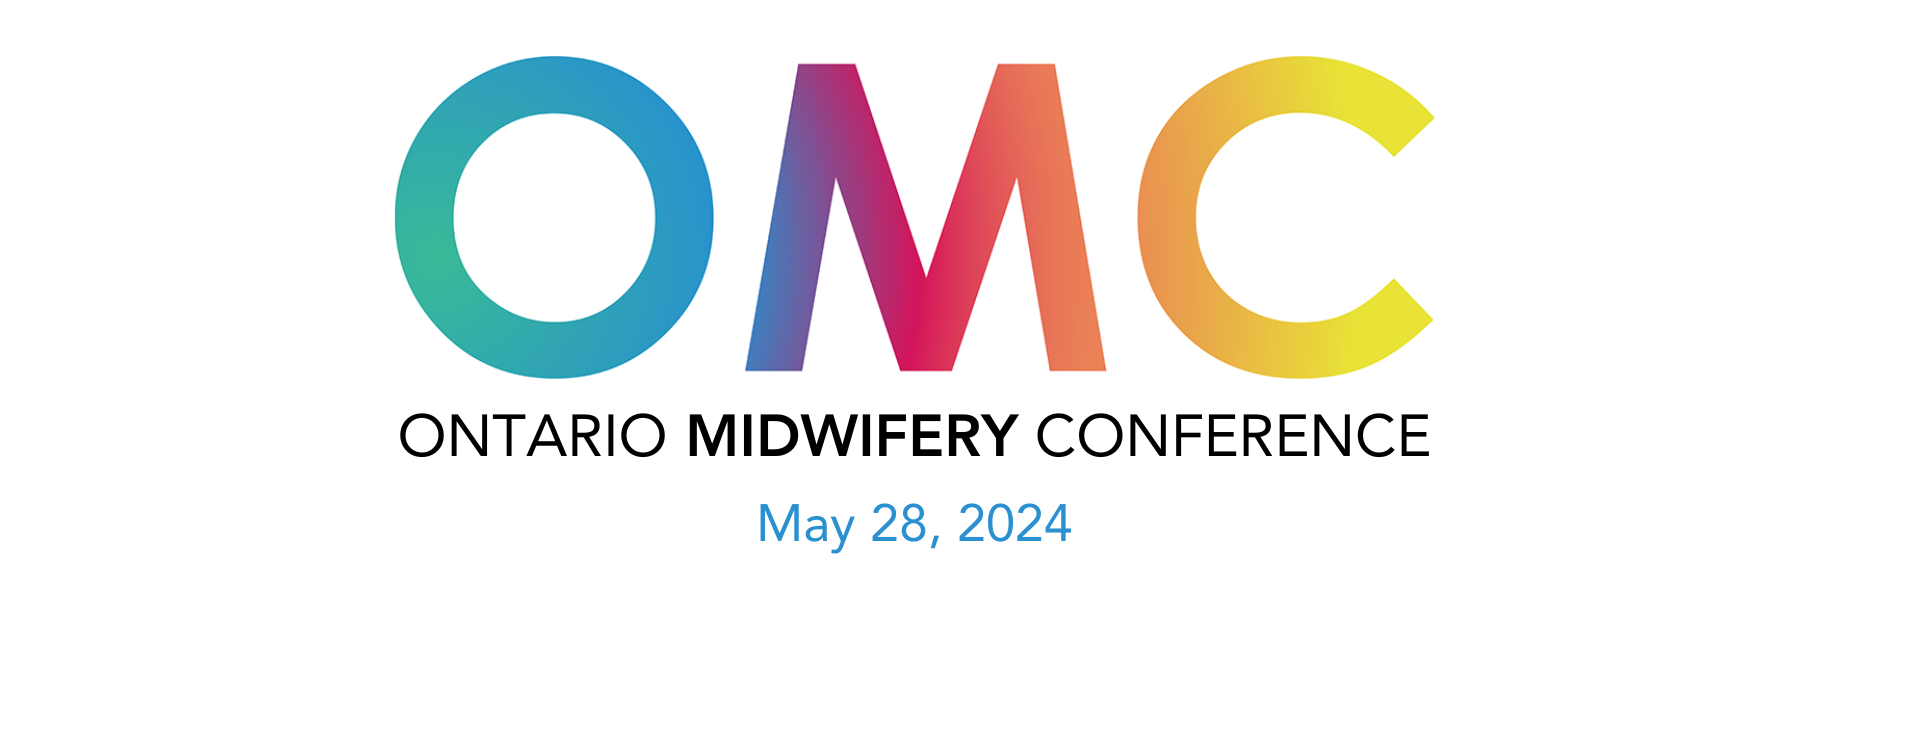 Colourful graphic text logo reads "O-M-C Ontario Midwifery Conference. May 28, 2024."